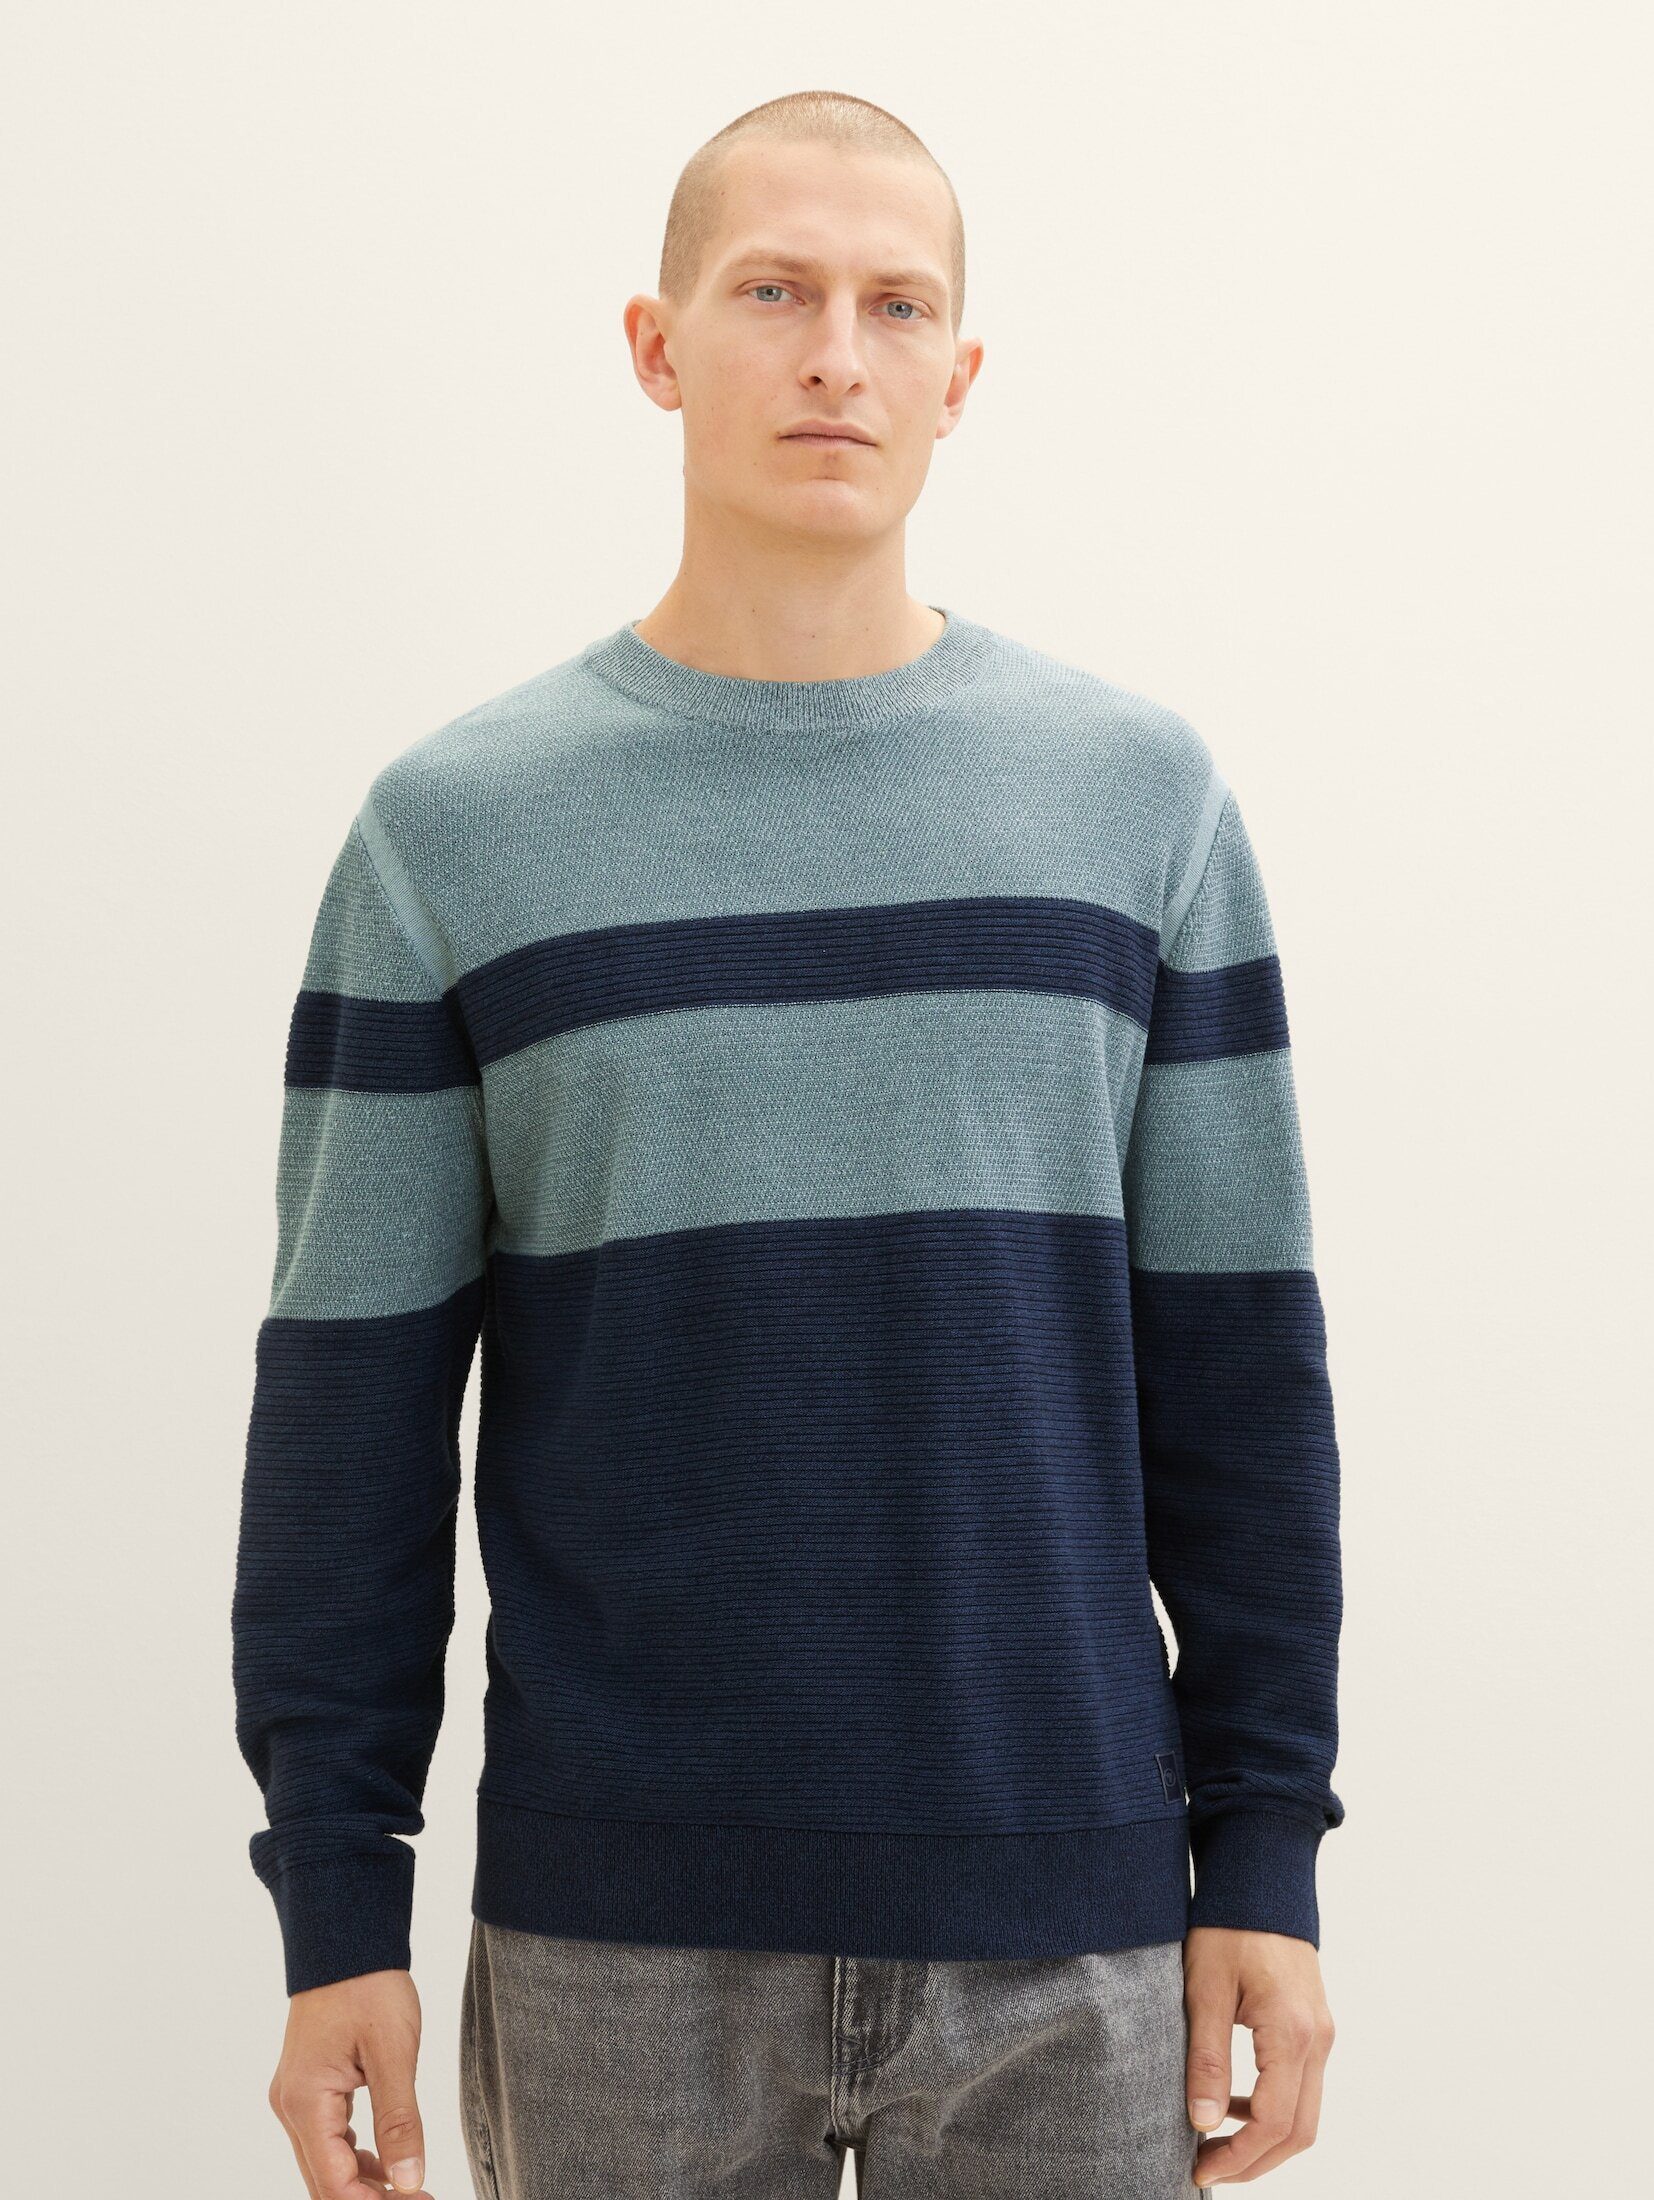 TOM TAILOR Strickpullover Strickpullover mit Materialmix teal navy multi structure